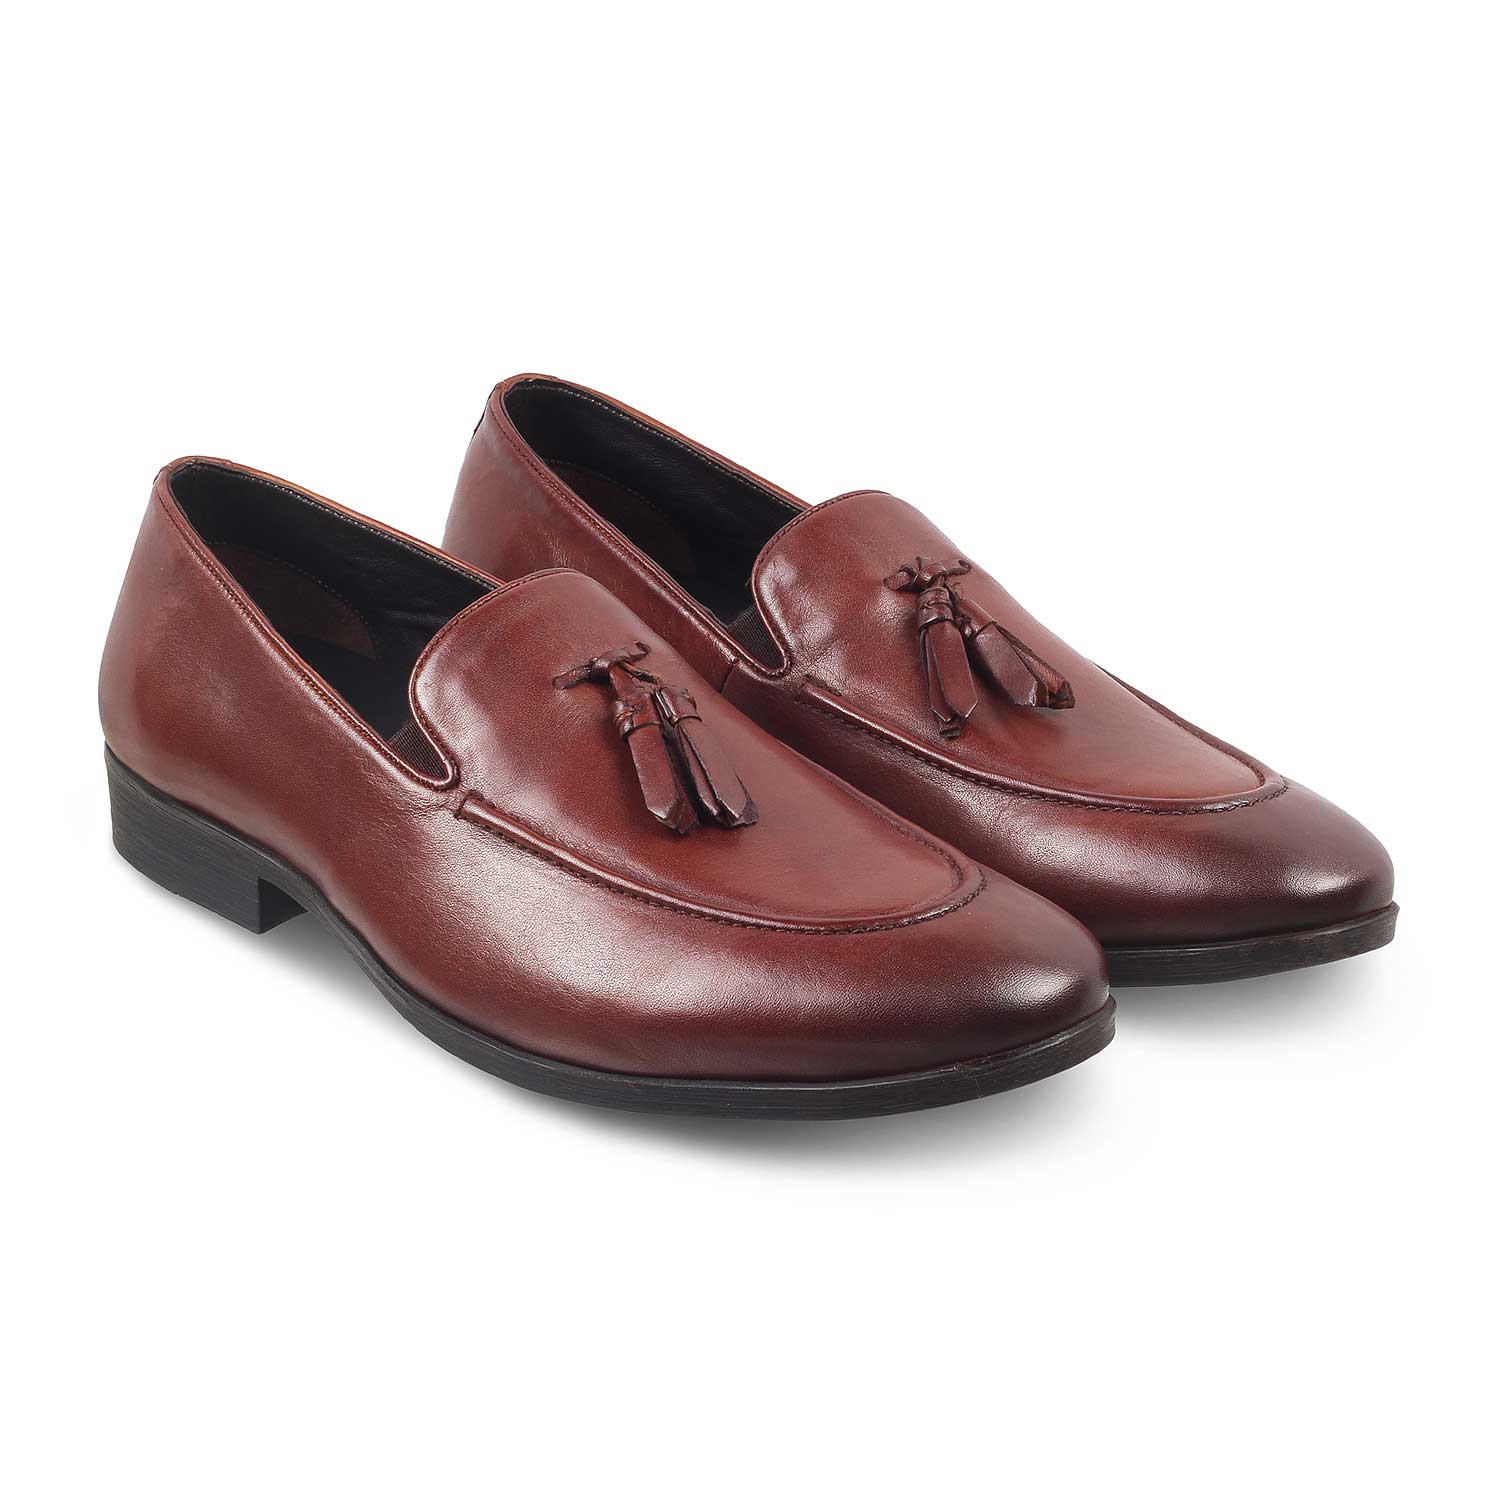 The Michan Tan Men's Leather Tassel Loafers Tresmode - Tresmode